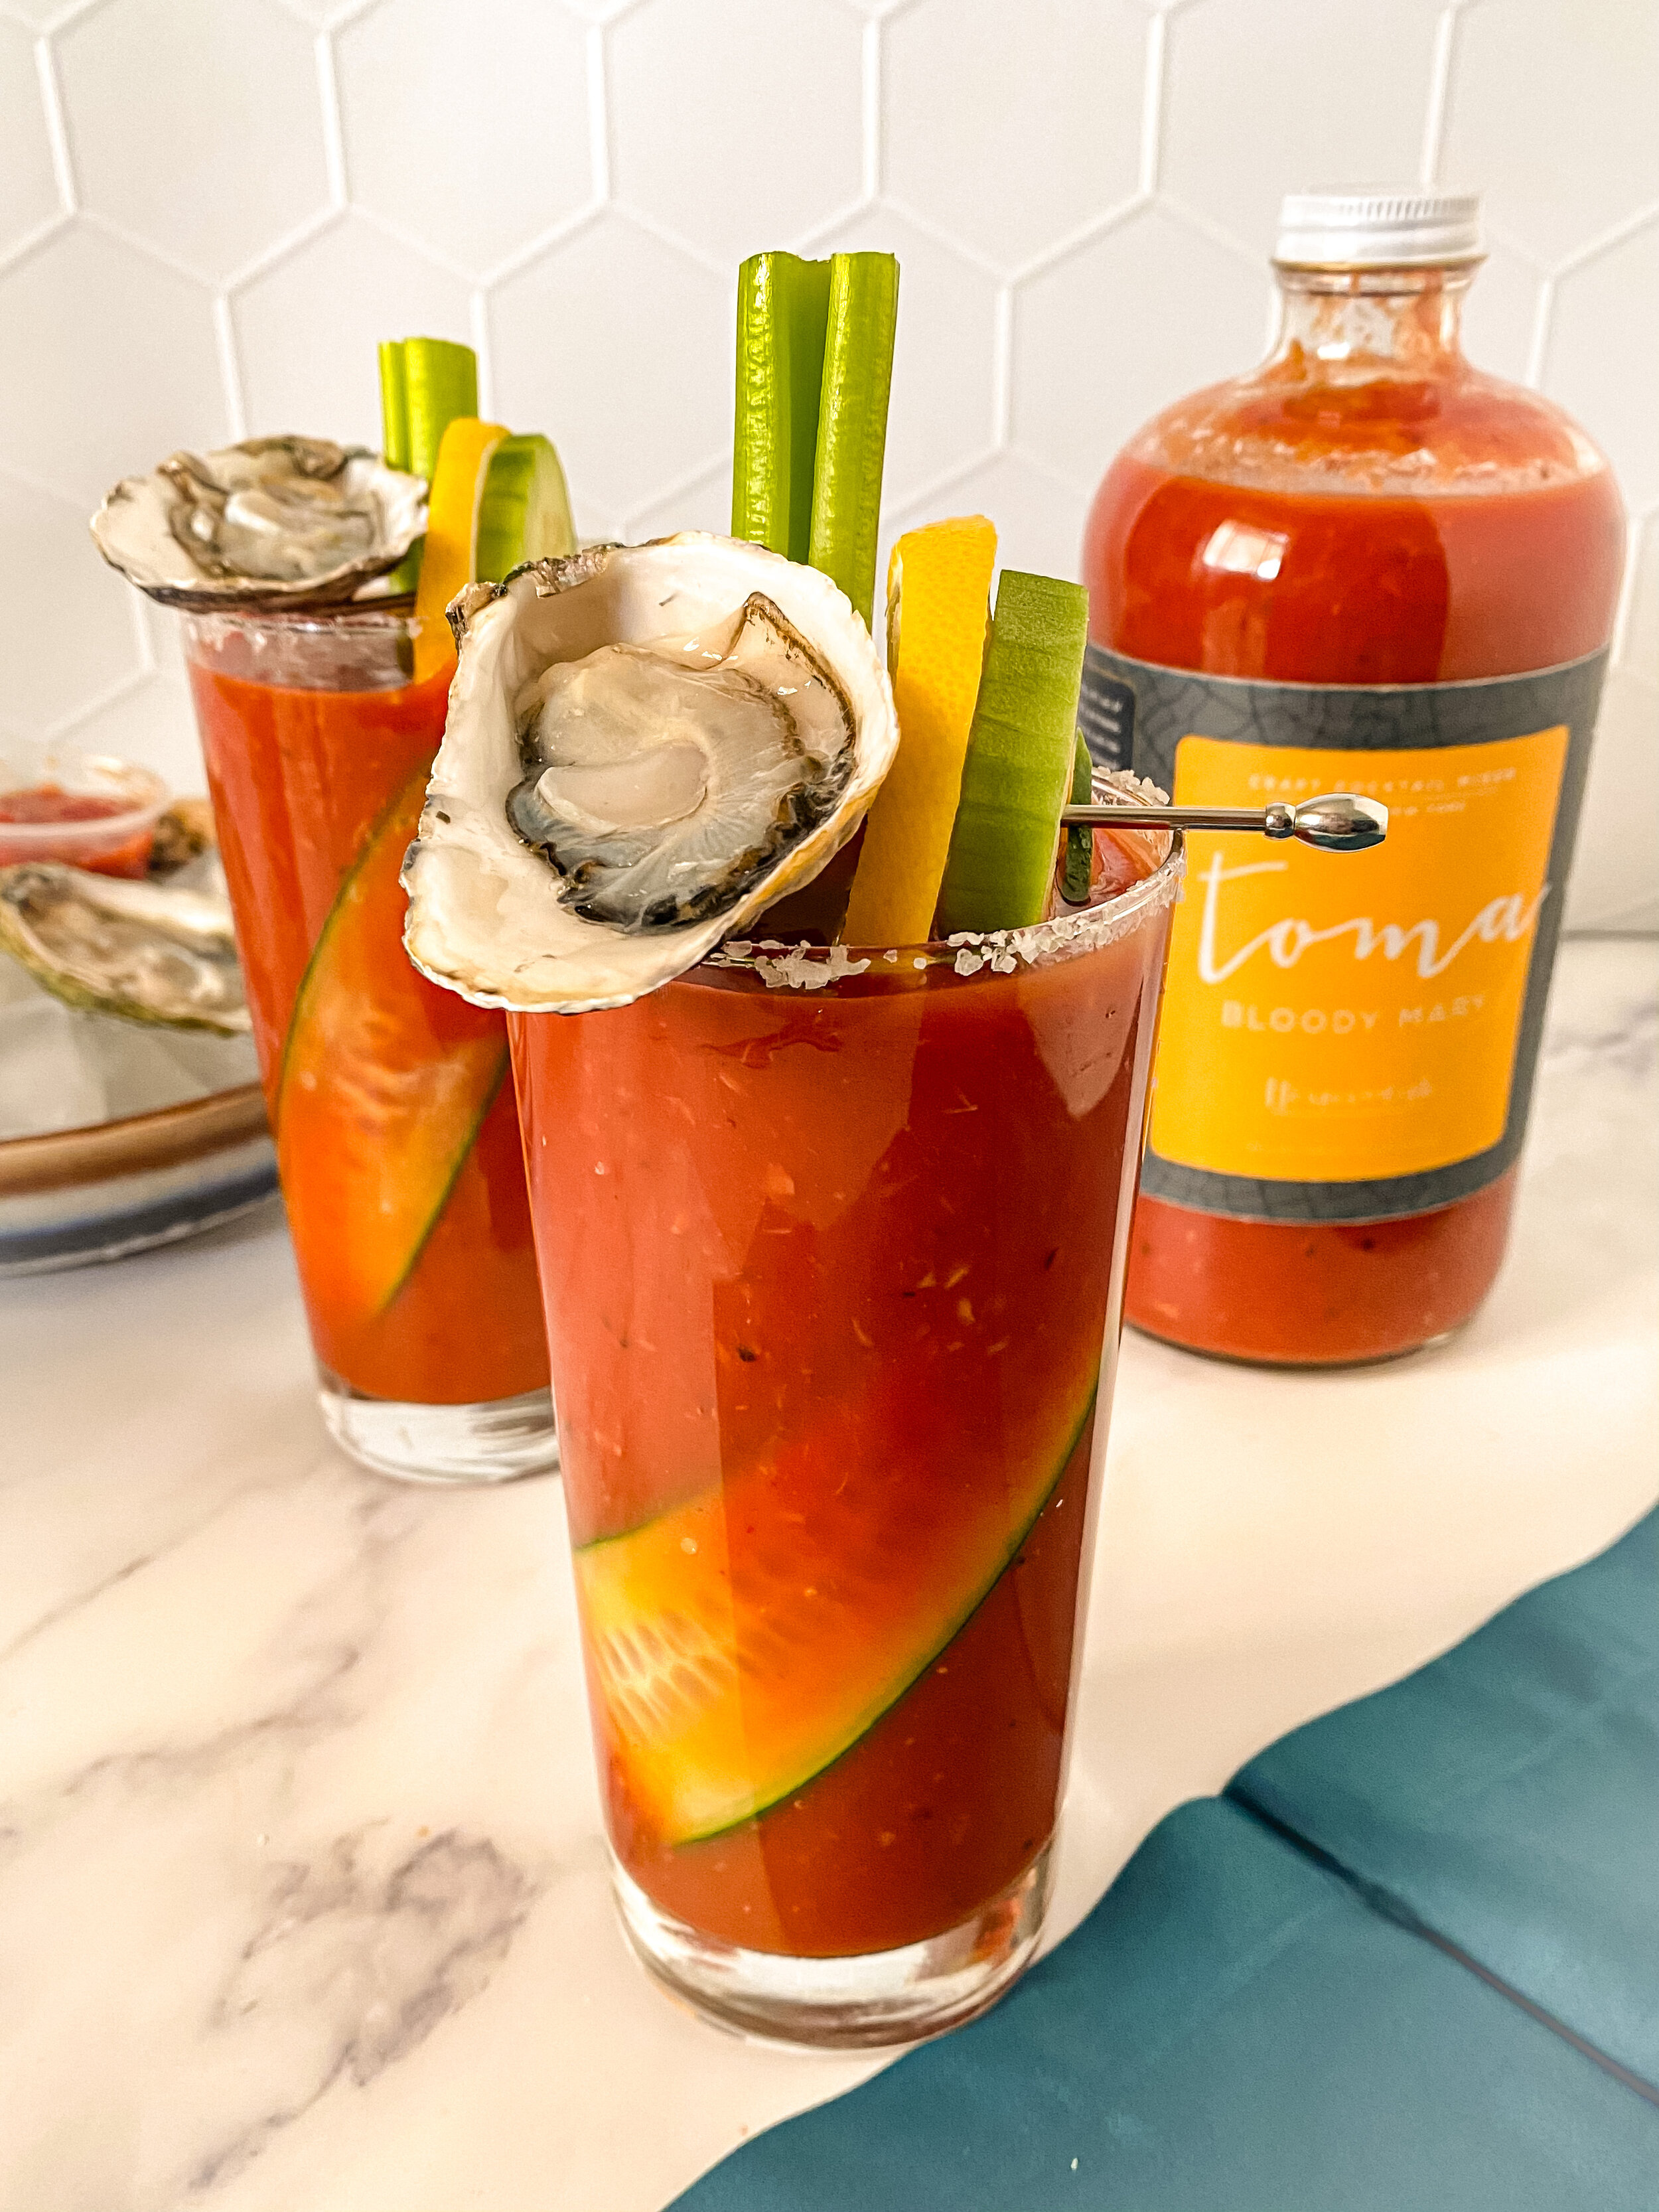 https://images.squarespace-cdn.com/content/v1/58939a42d2b857c51ea91c0d/1609464367132-AMY04YLRPFFLLYE9QWM5/cucumber+gin+bloody+mary+made+with+toma+bloody+mary+mix+bloody+mary+obsessed+2.JPG